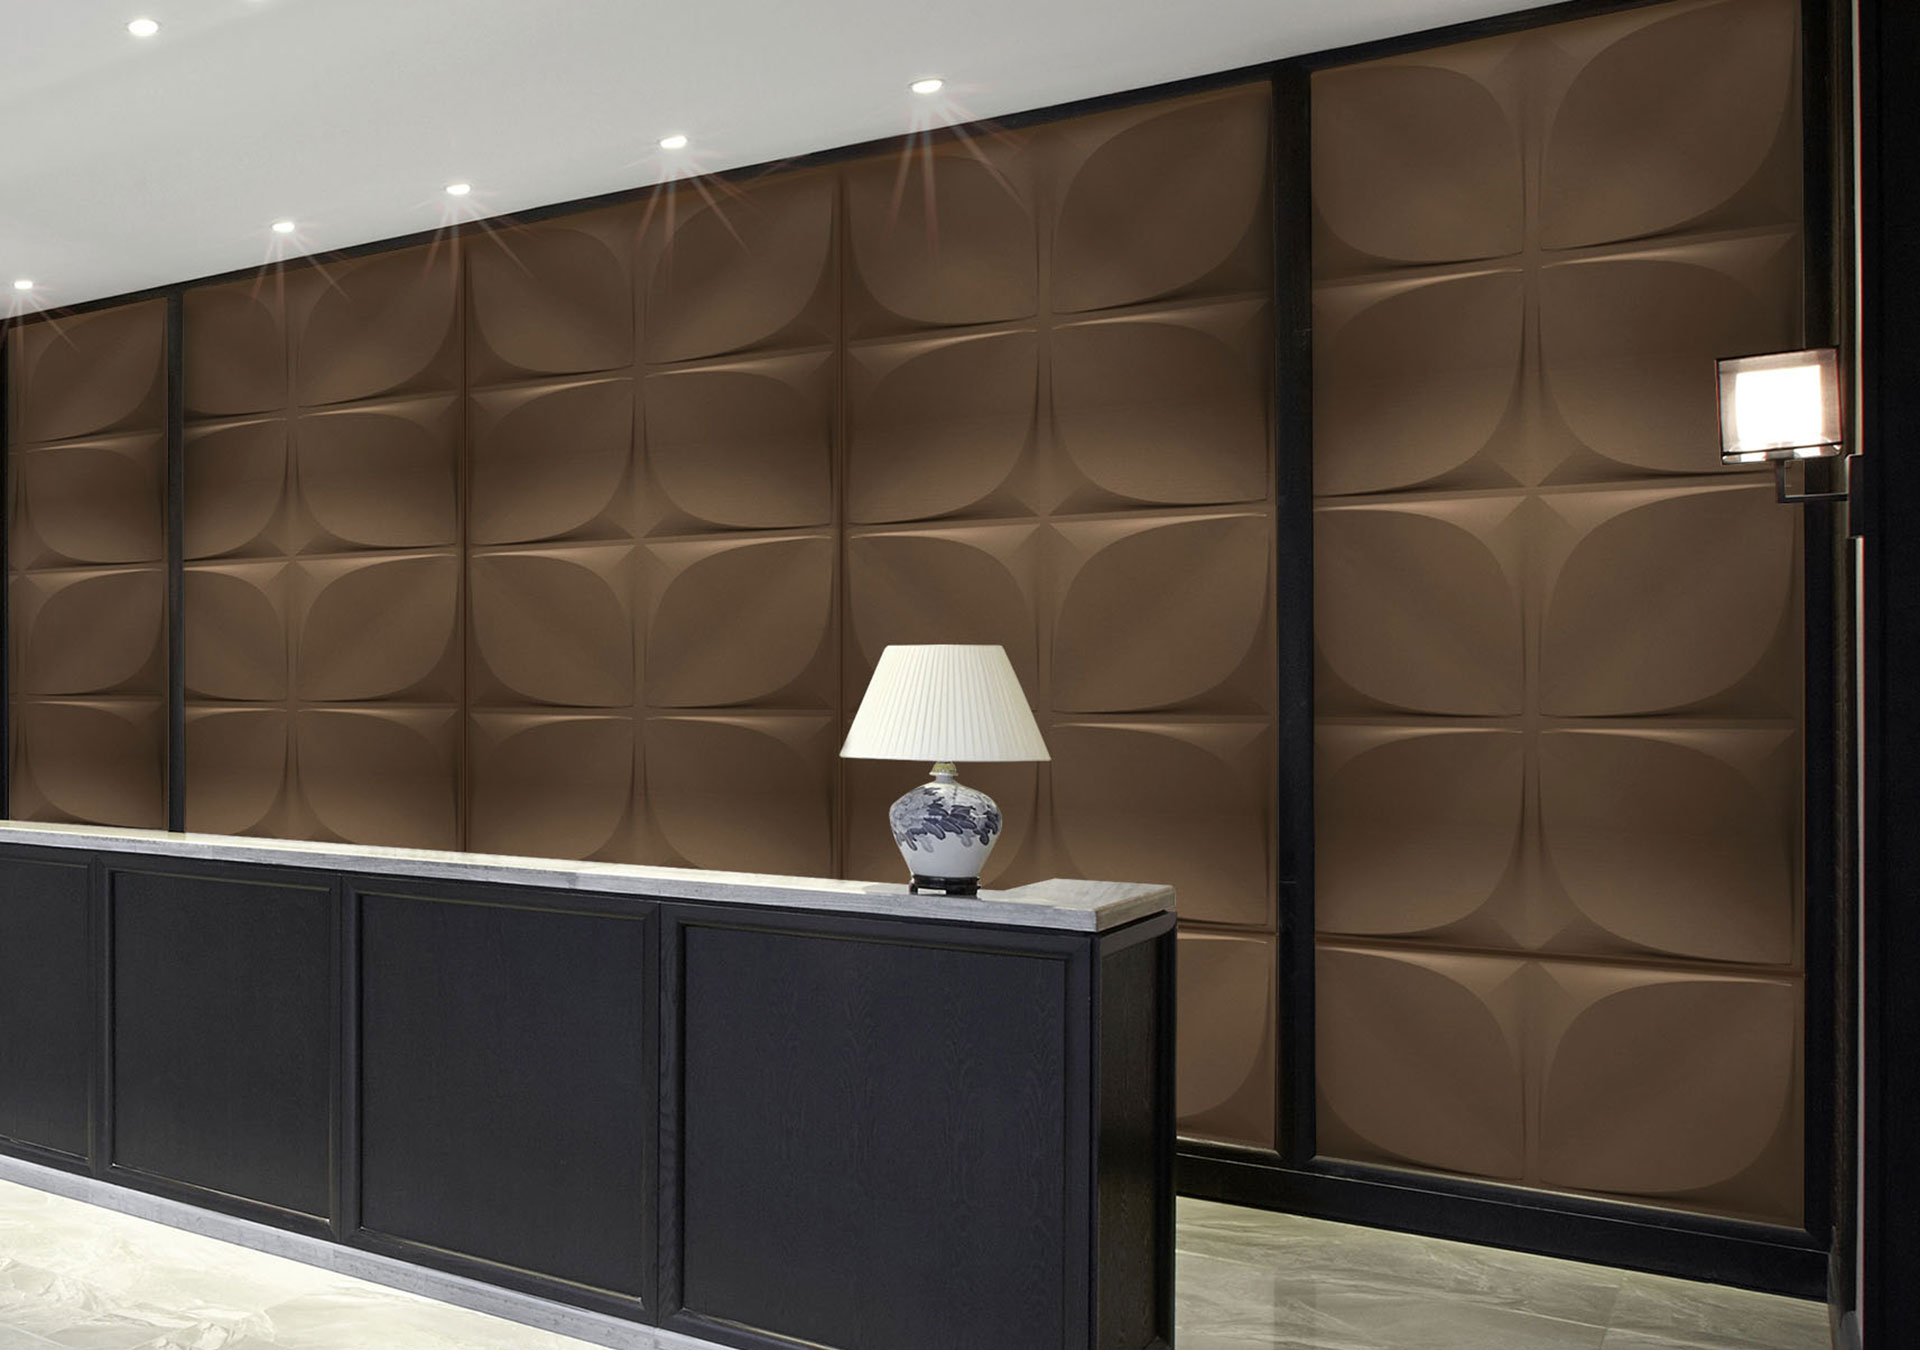 Buy Decorative Ceiling Tiles For Your Home Decorative Ceiling Tiles